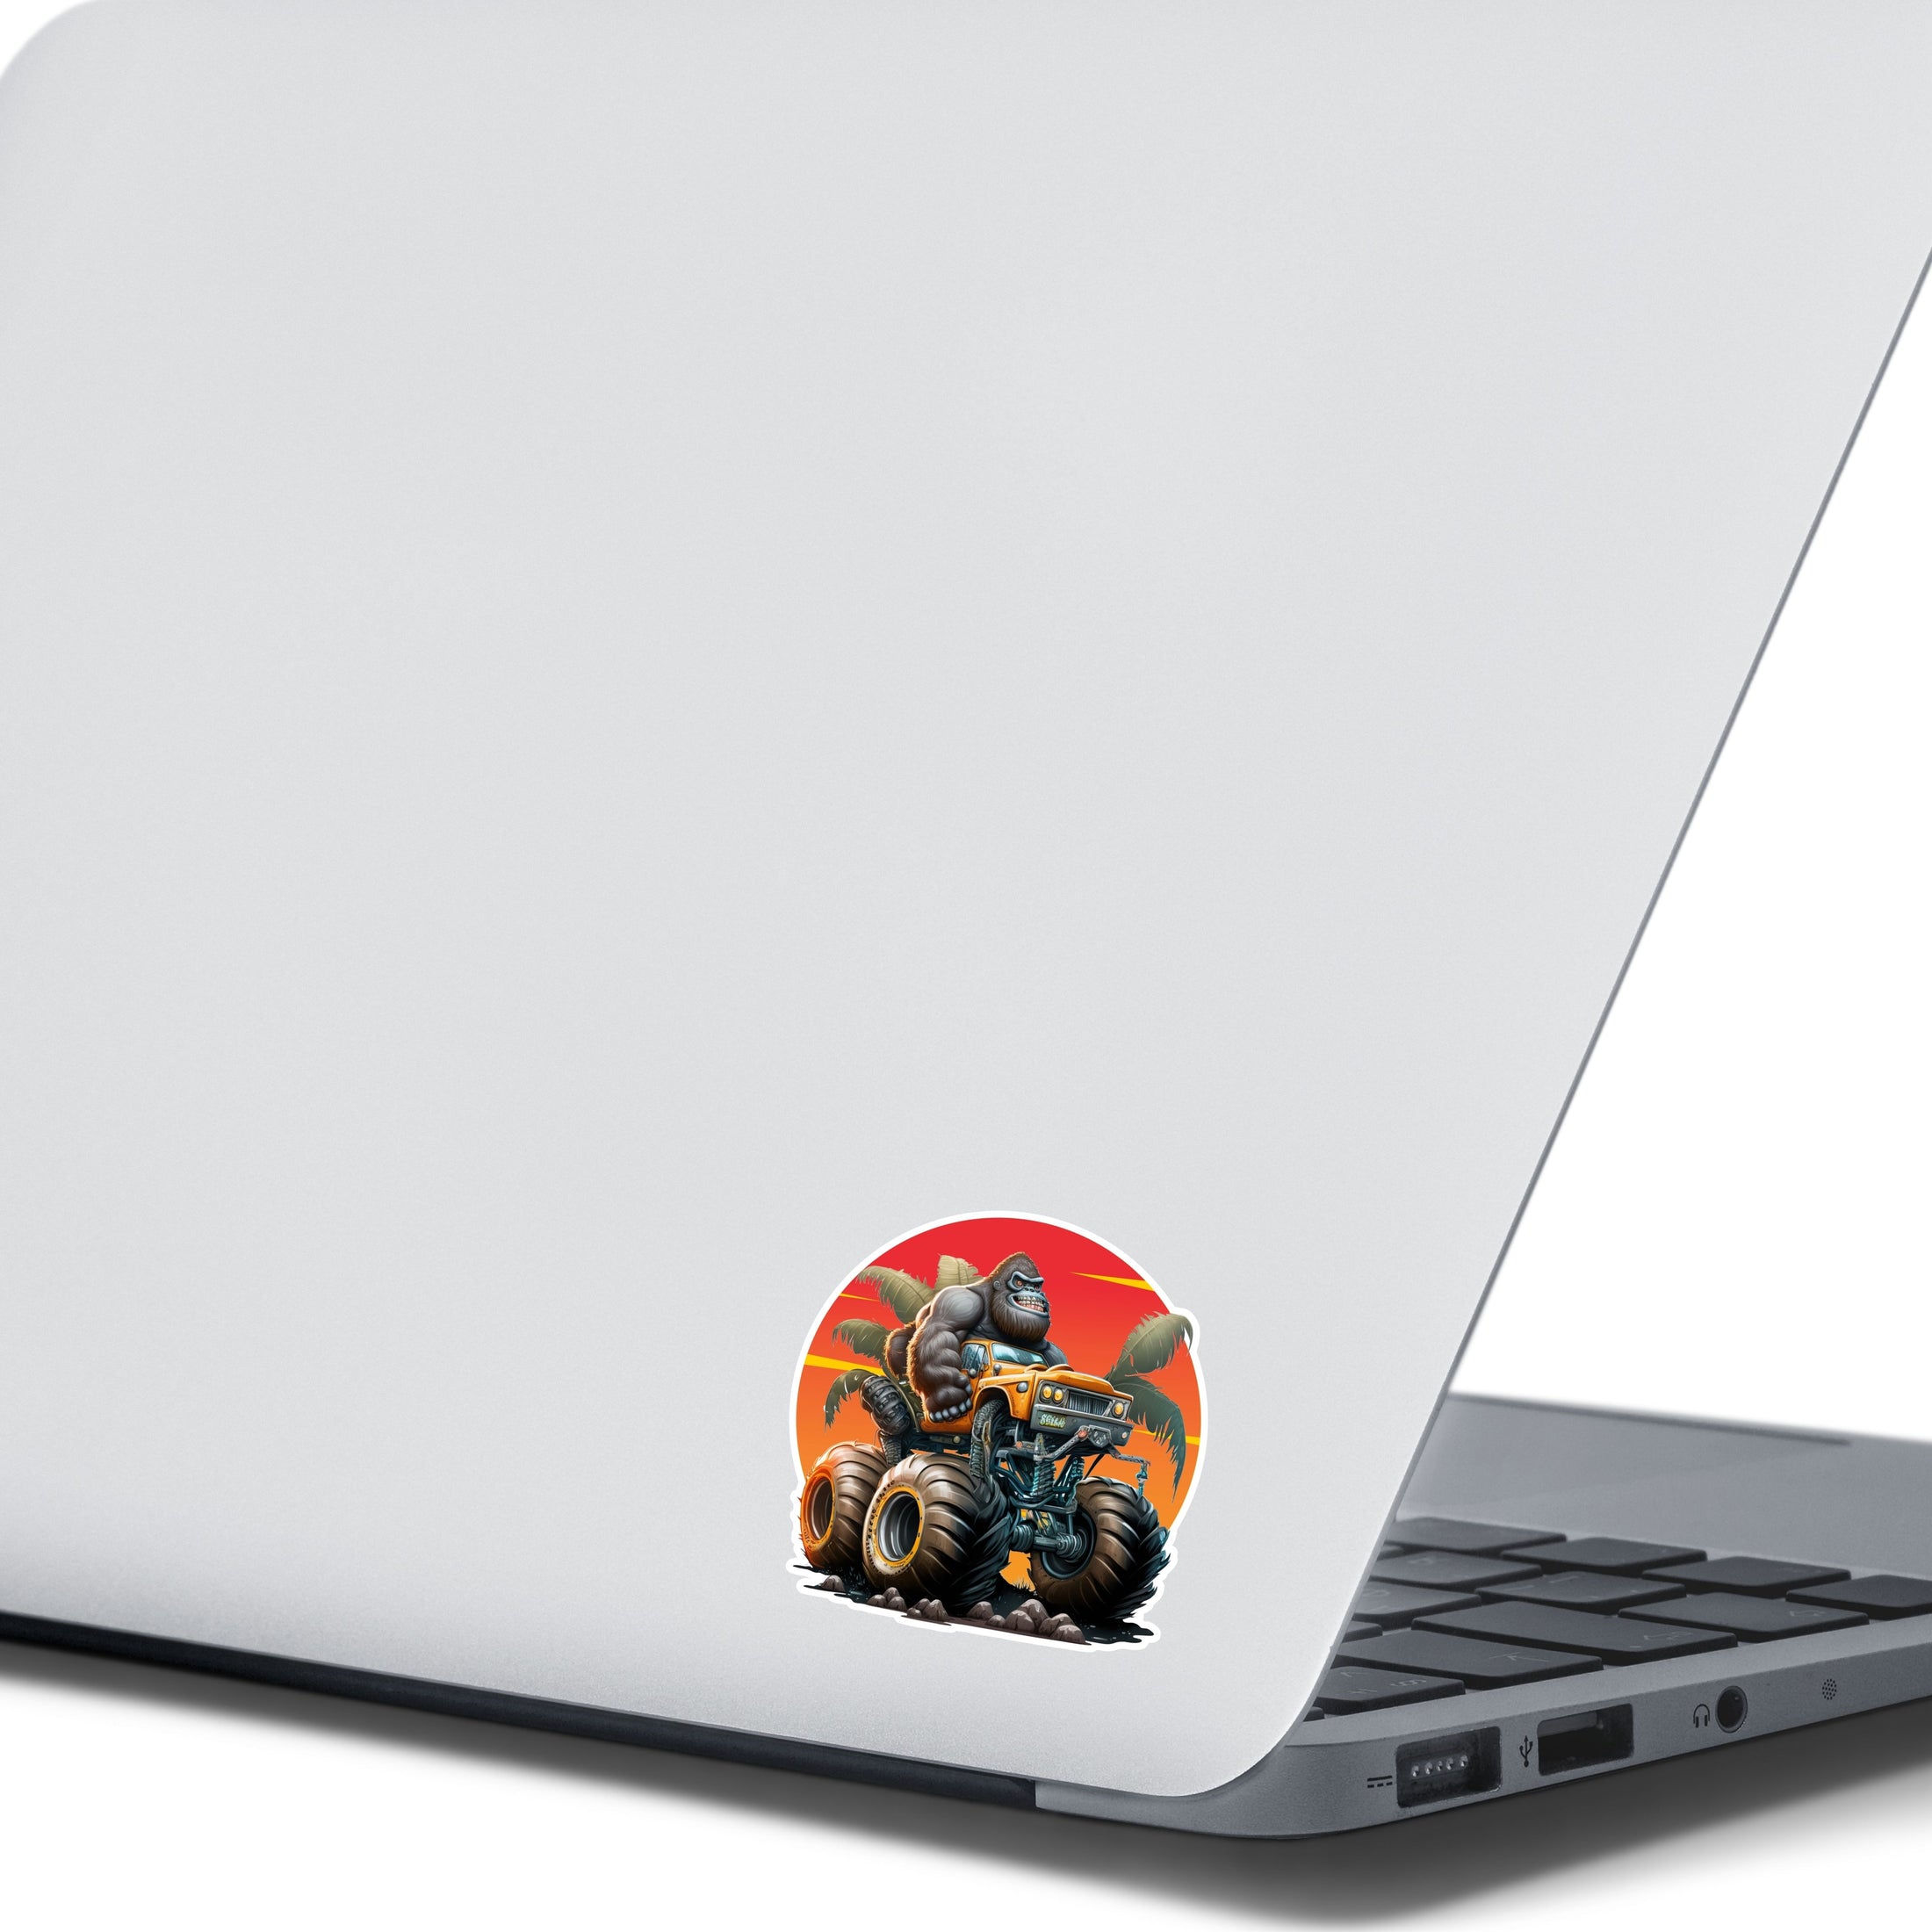 This image shows the gorilla monster truck sticker on the back of an open laptop.